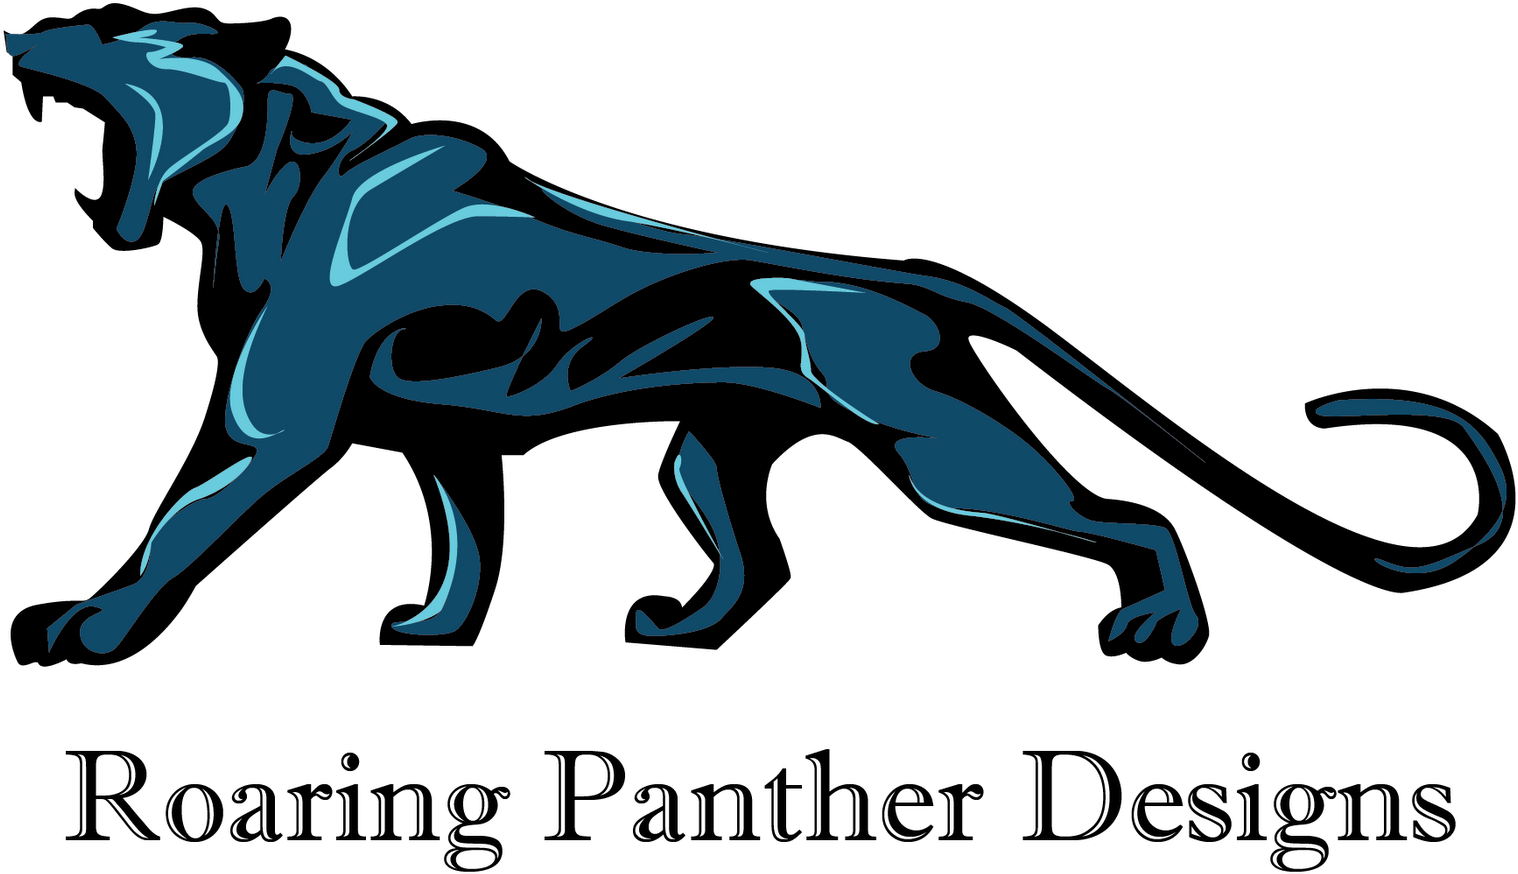 Stylized Panther Logo Graphic PNG